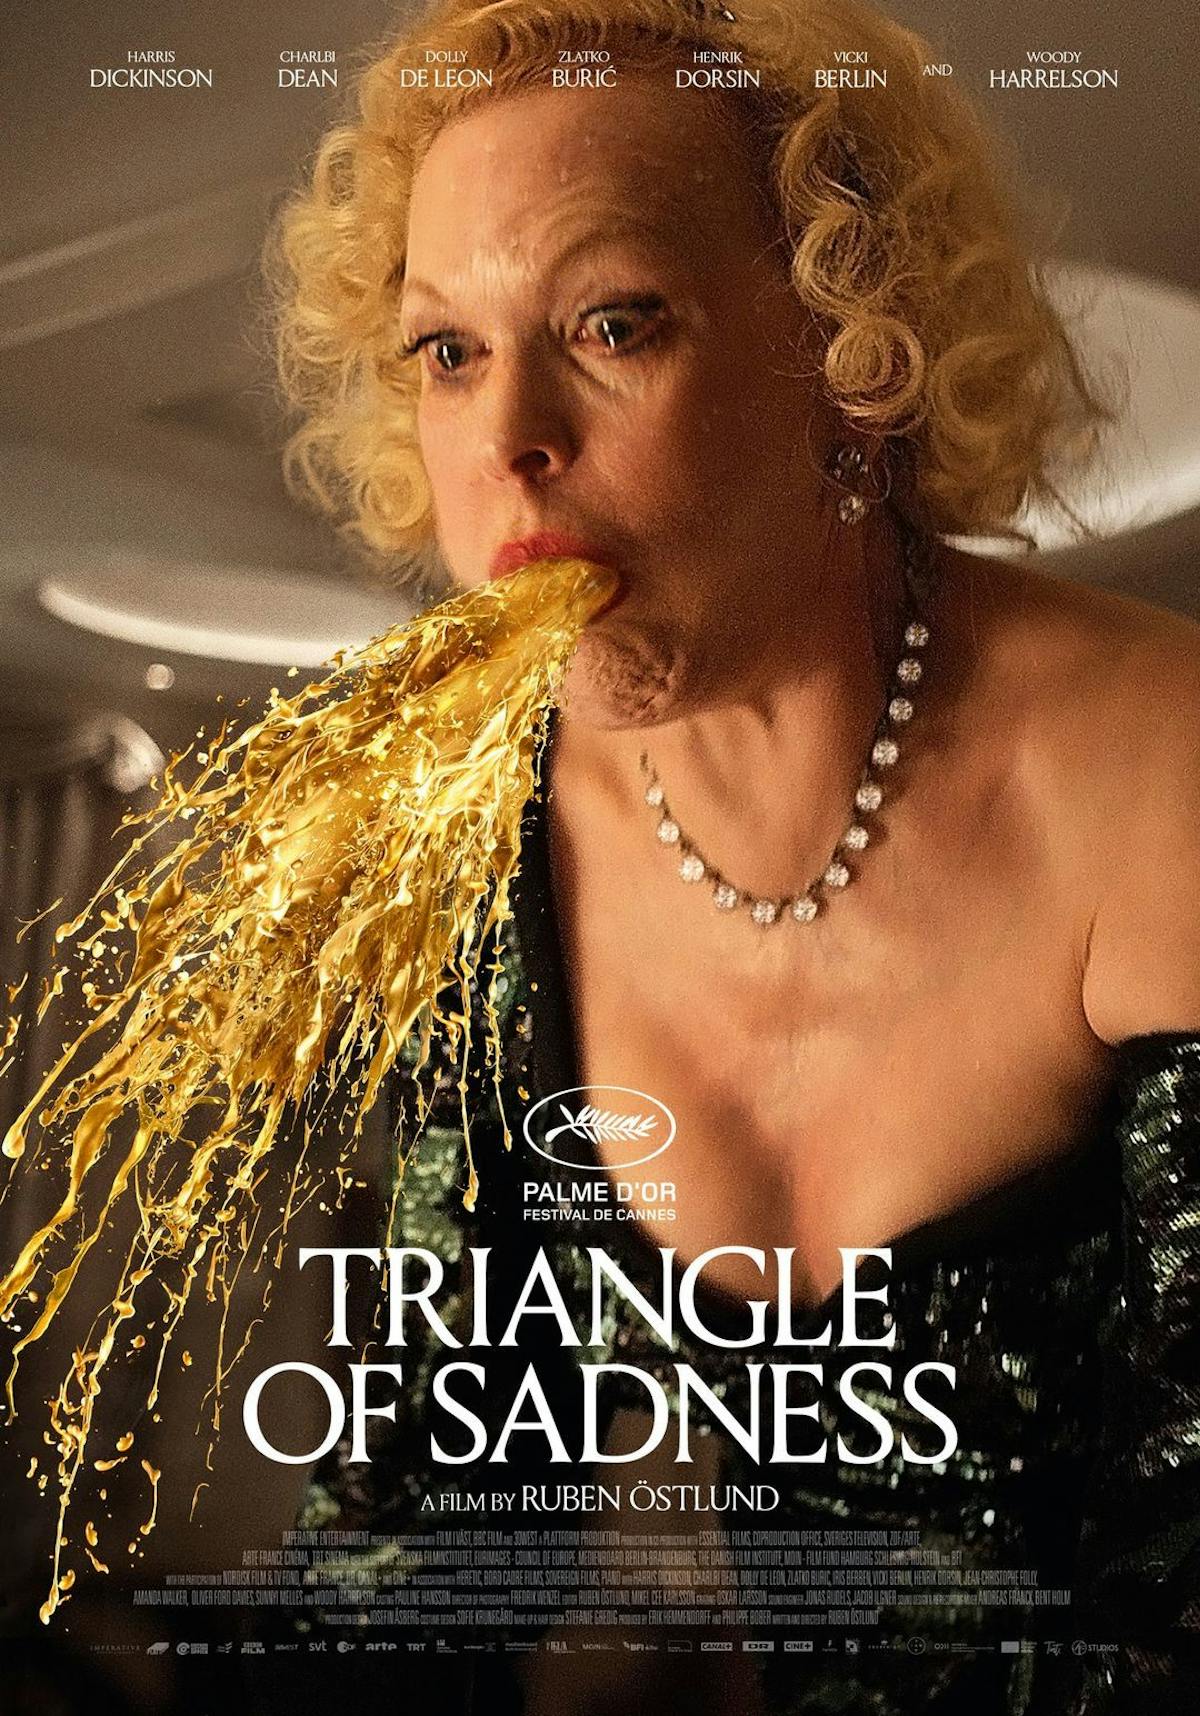 Triangel of sadness poster